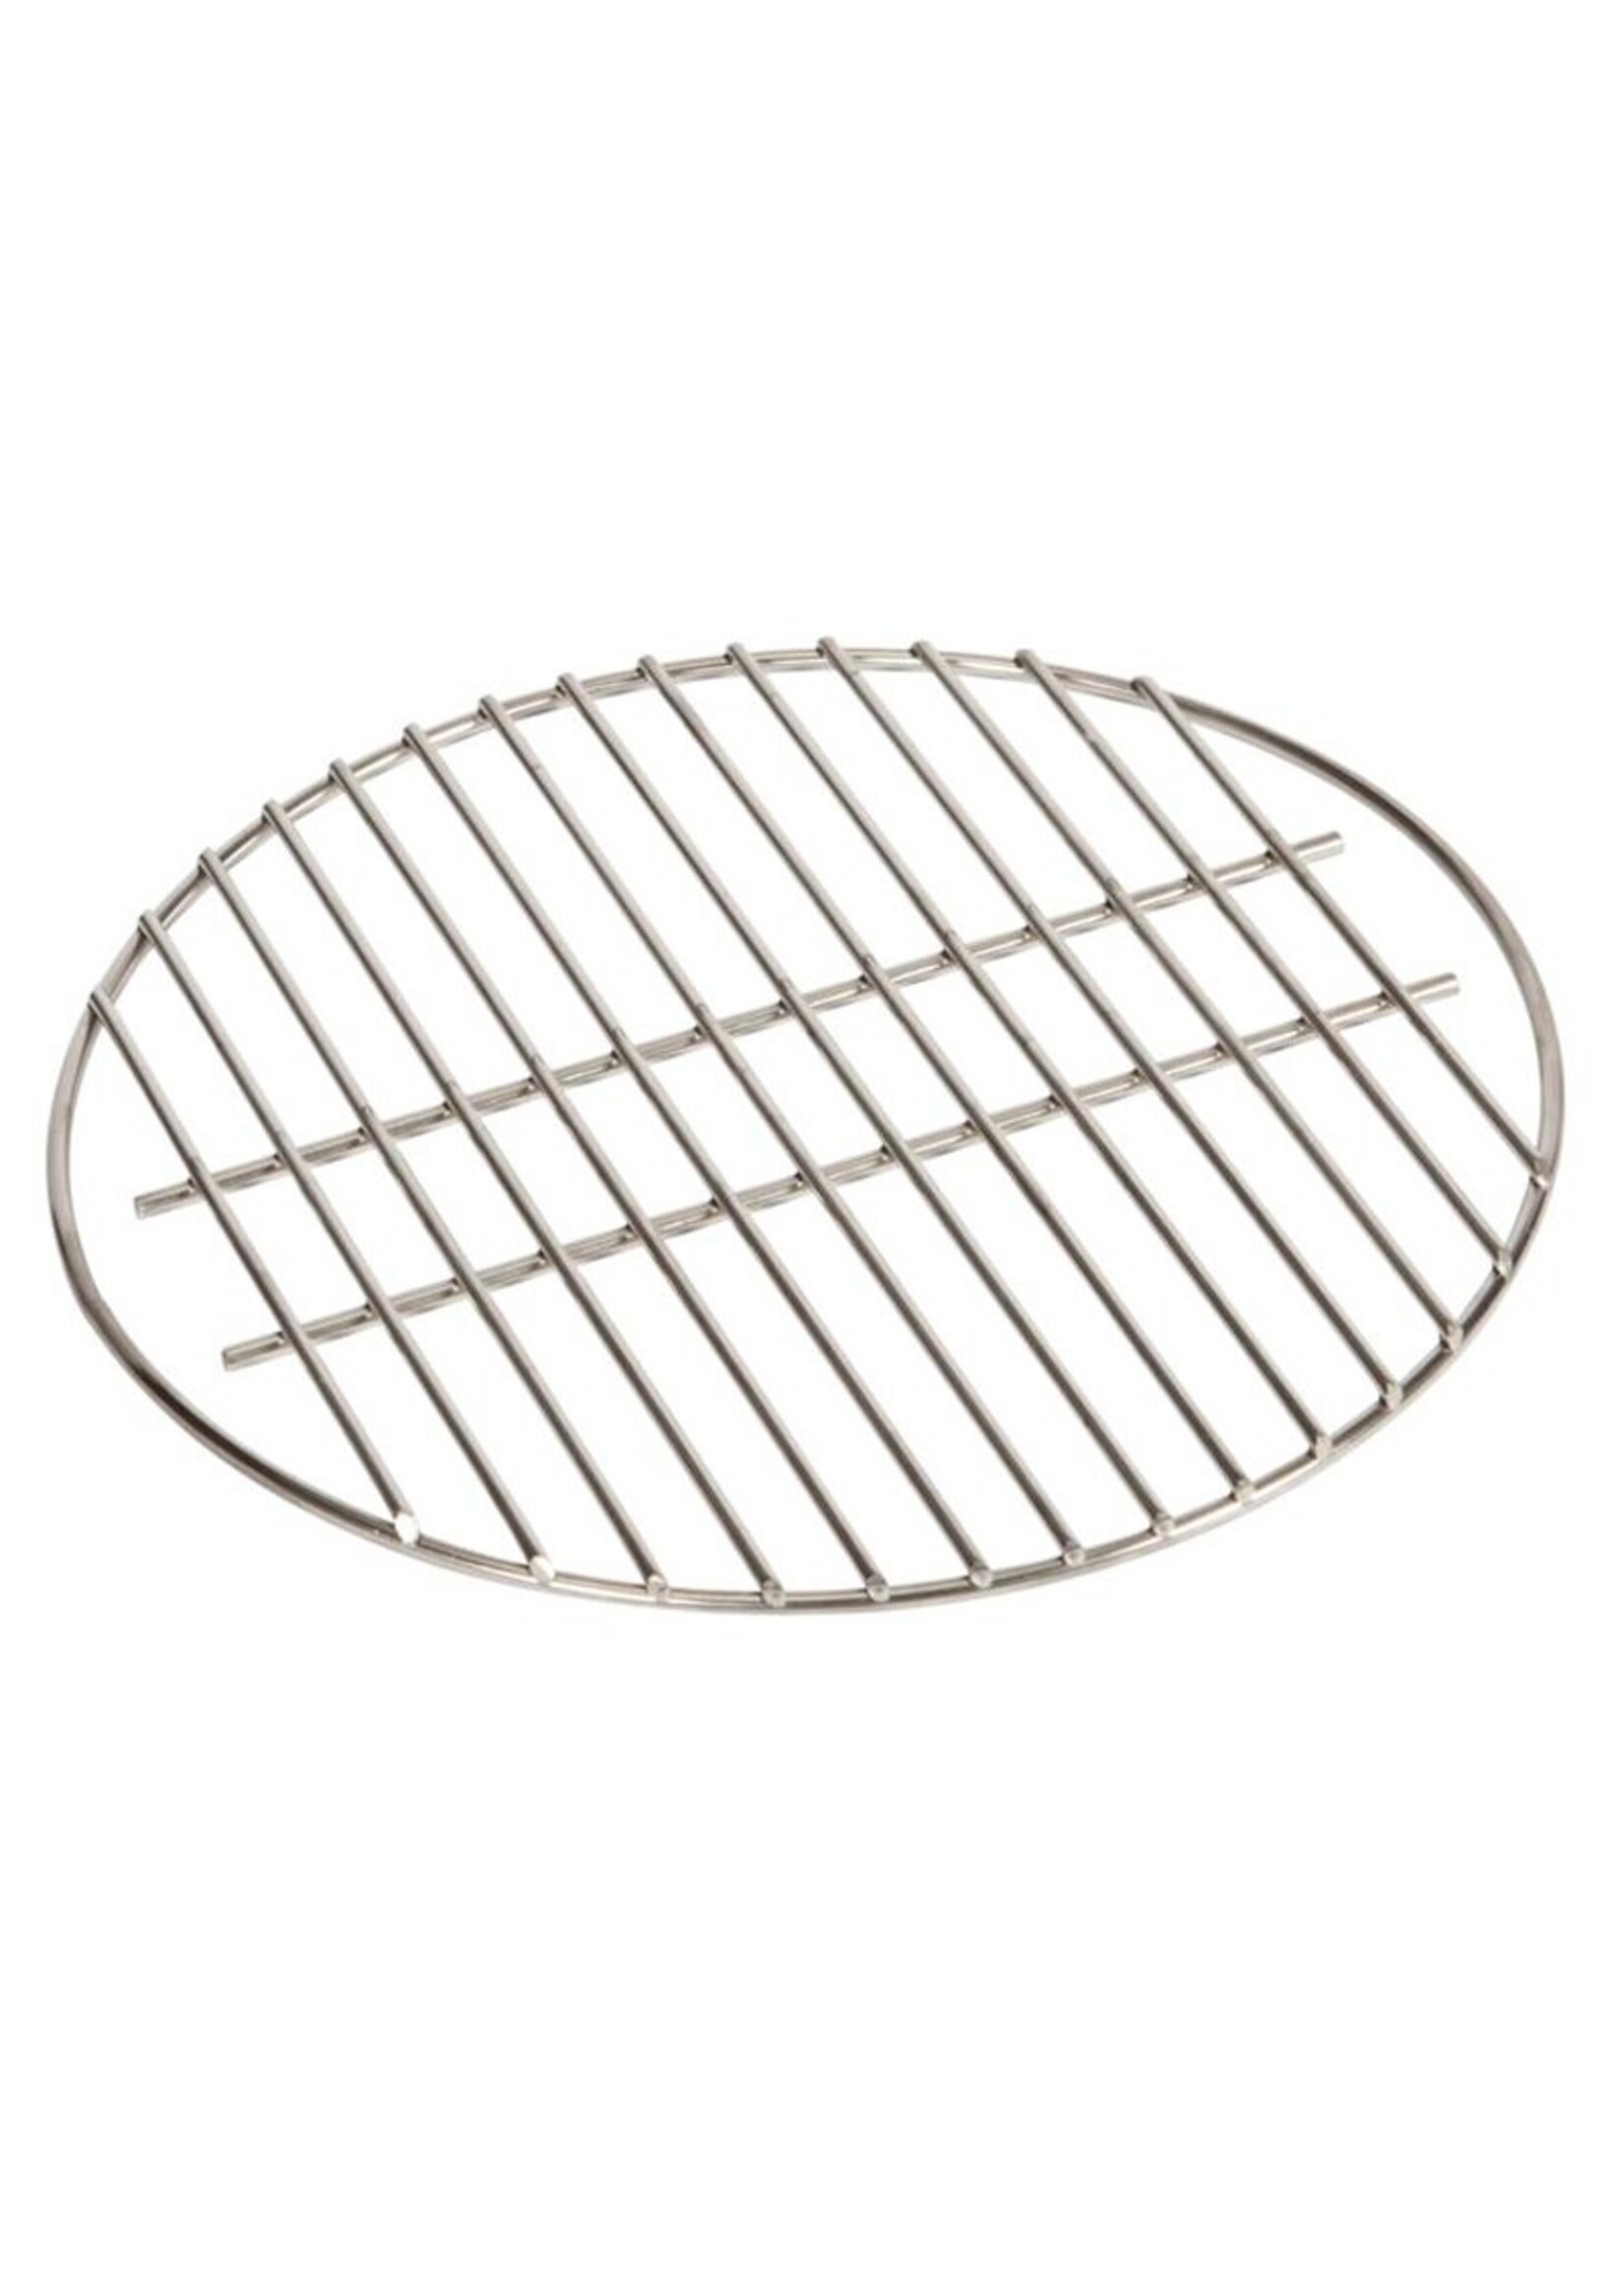 Big Green Egg BGE 18in Stainless Steel Grid - Large